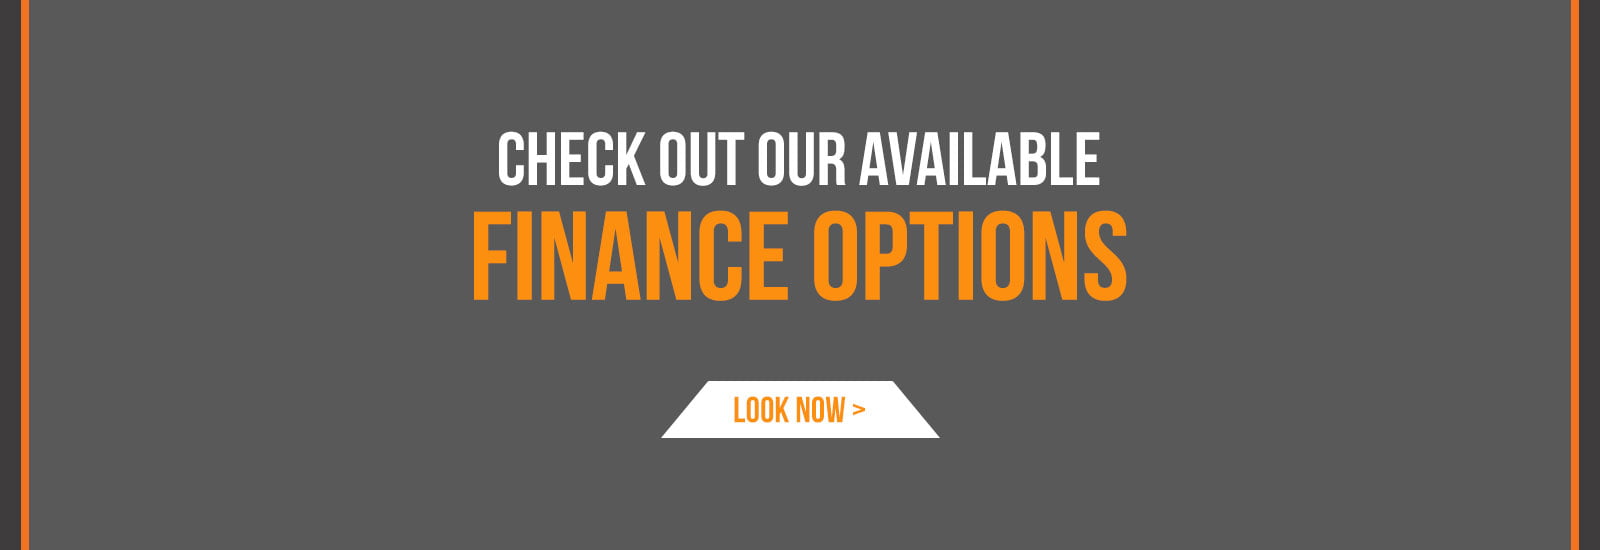 Check out our available finance options